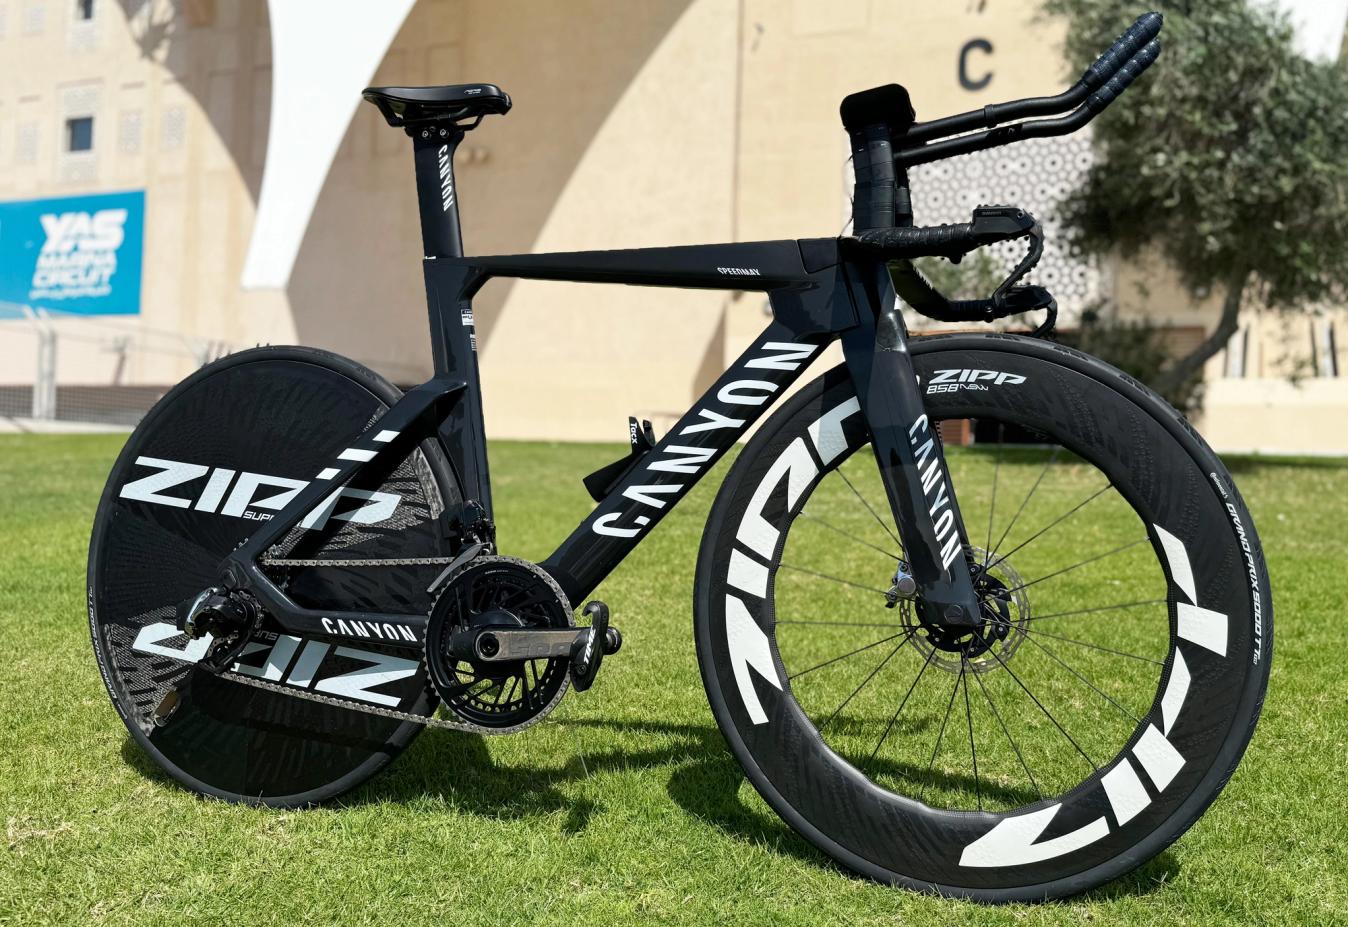 The SRAM Red groupset sat aboard Canyon’s Speedmax, a time trial bike the German brand describes as an “aerodynamic masterpiece”. It’s hard to argue with that when looking at the bike.